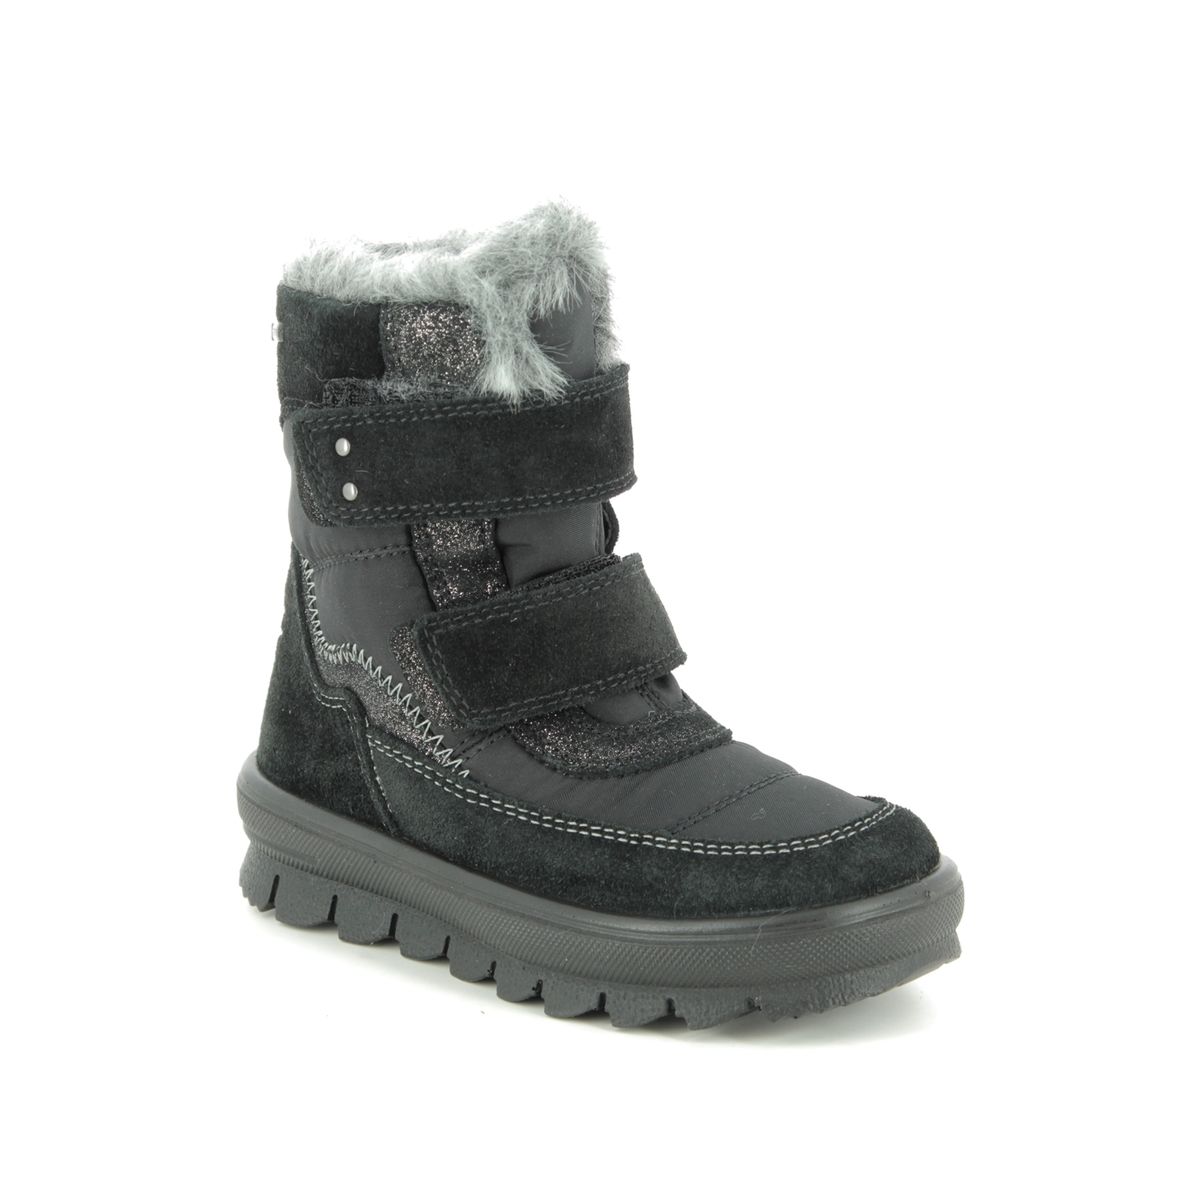 Superfit Flavia Vel Gtx Black Suede Kids Toddler Girls Boots 09214-00 In Size 33 In Plain Black Suede For kids